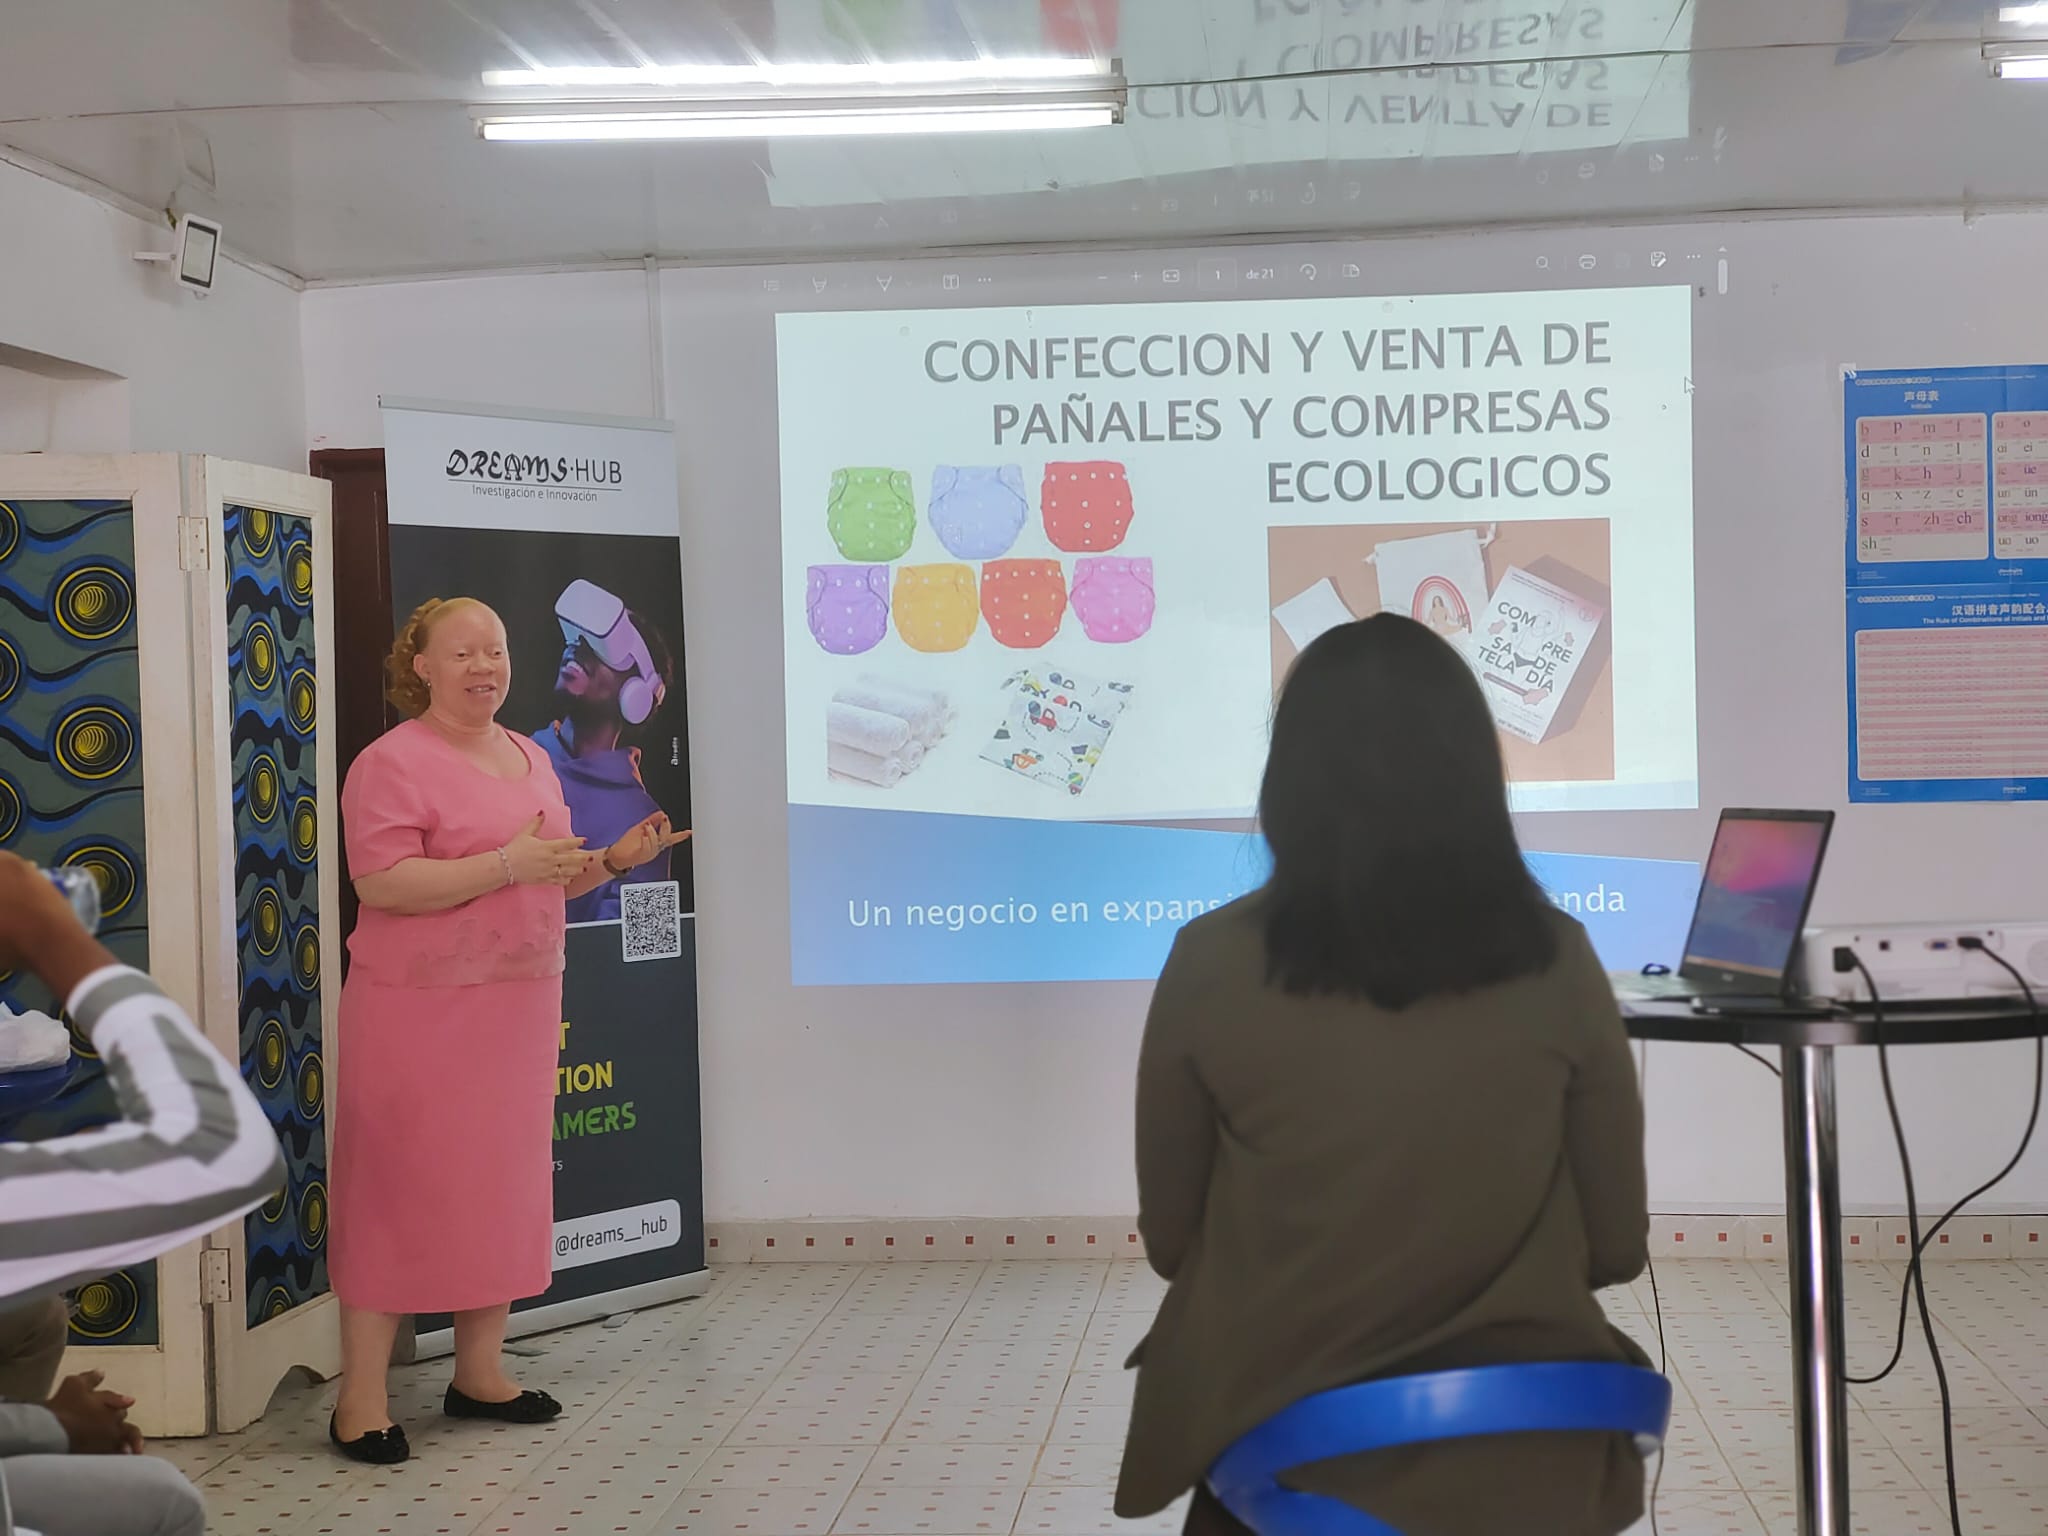 Equatorial Guinea: Ecological diapers and menstrual pads; the winning project of 'Pitch Your Dreams'